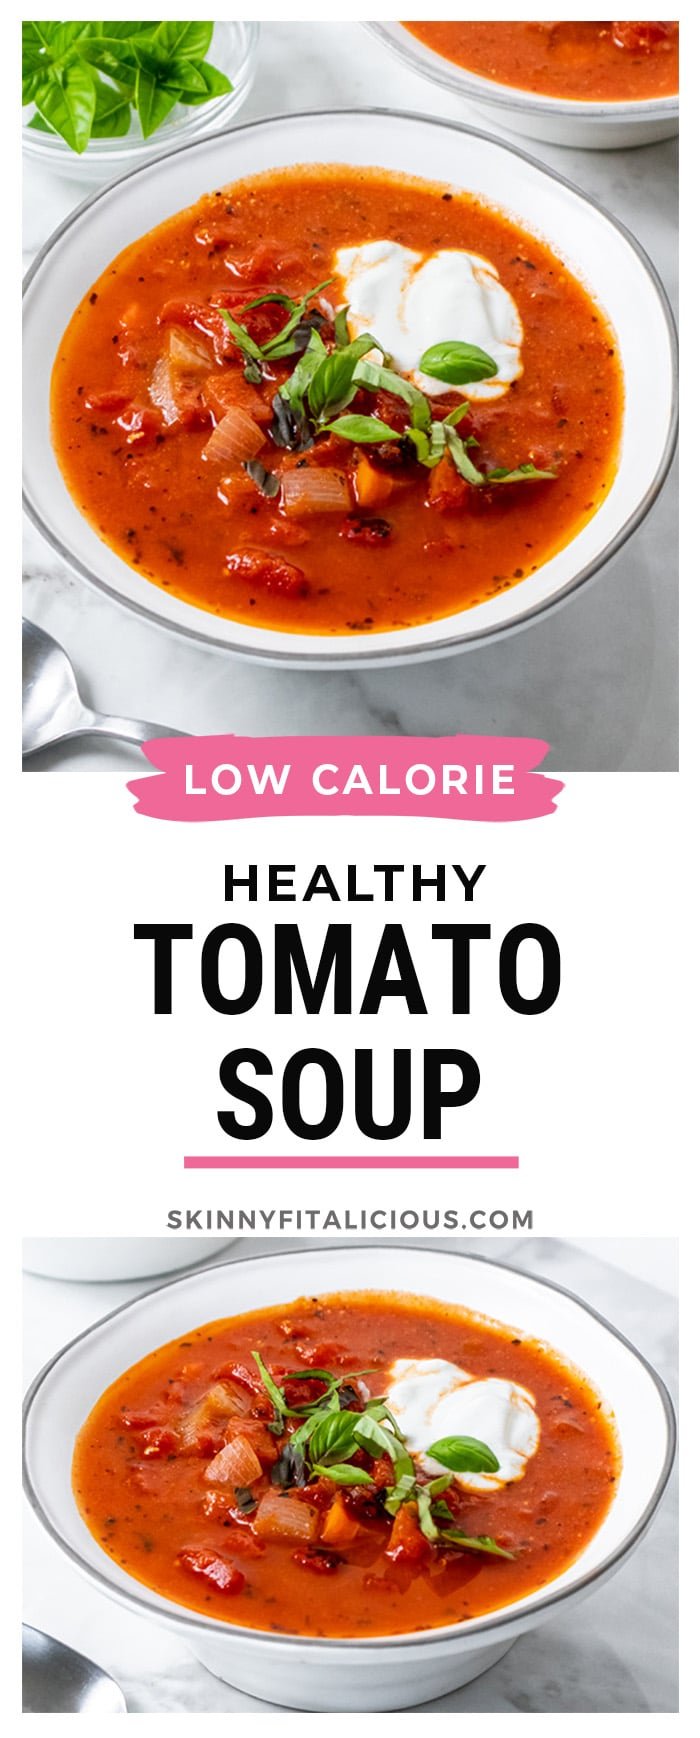 Low Calorie Tomato Soup made creamy with with a burst of protein in the instant pot or slow cooker. A healthy and simple homemade soup recipe that's made better for you!